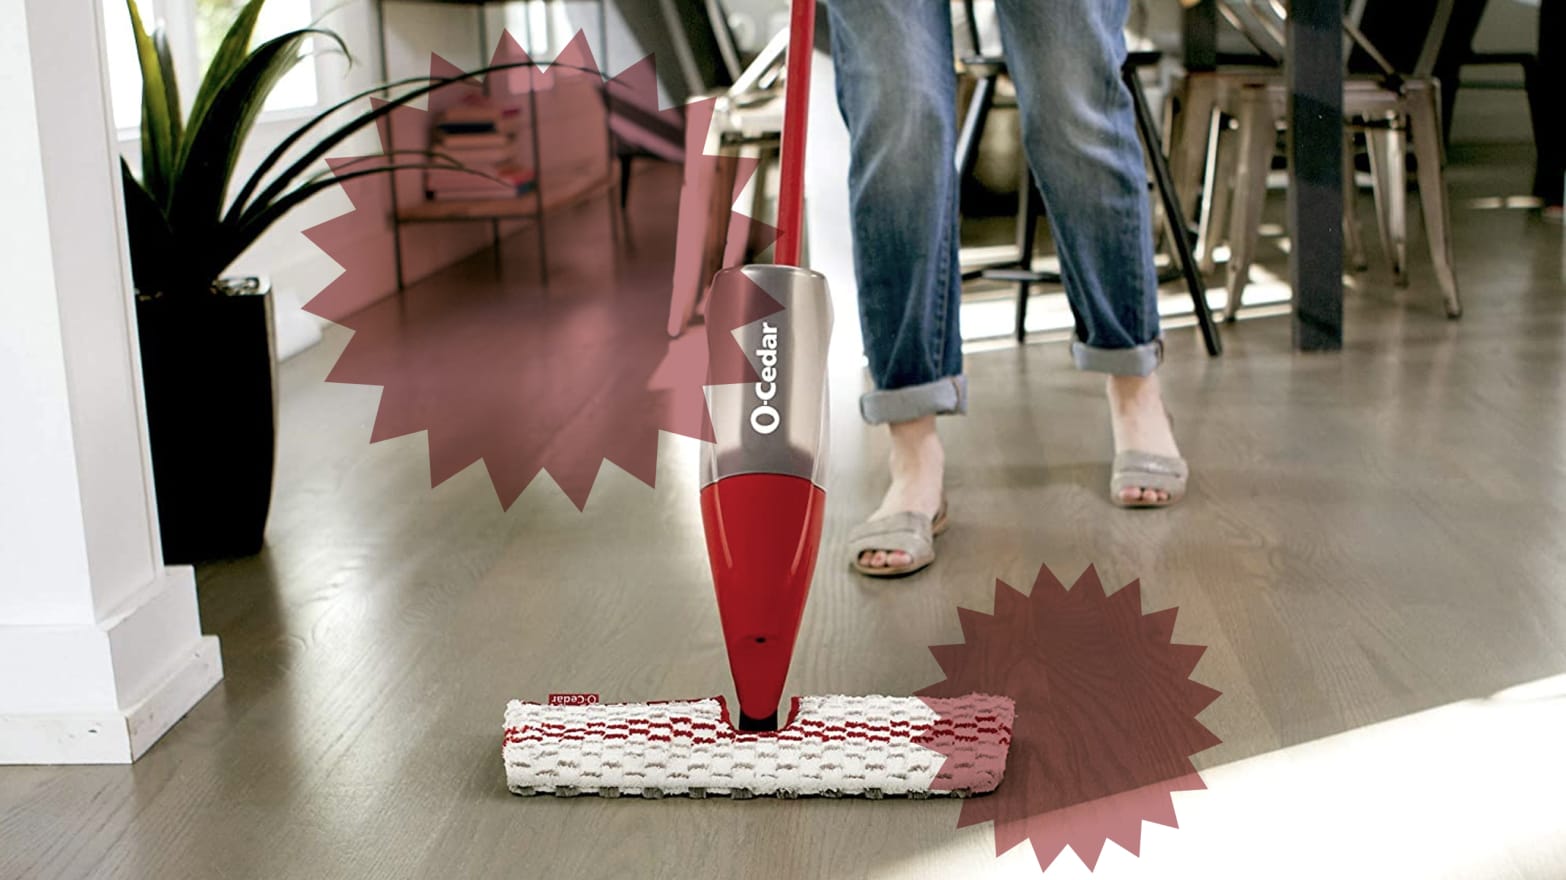 Multi-purpose Spray Mop For Cleaning Floors With Extra Reusable